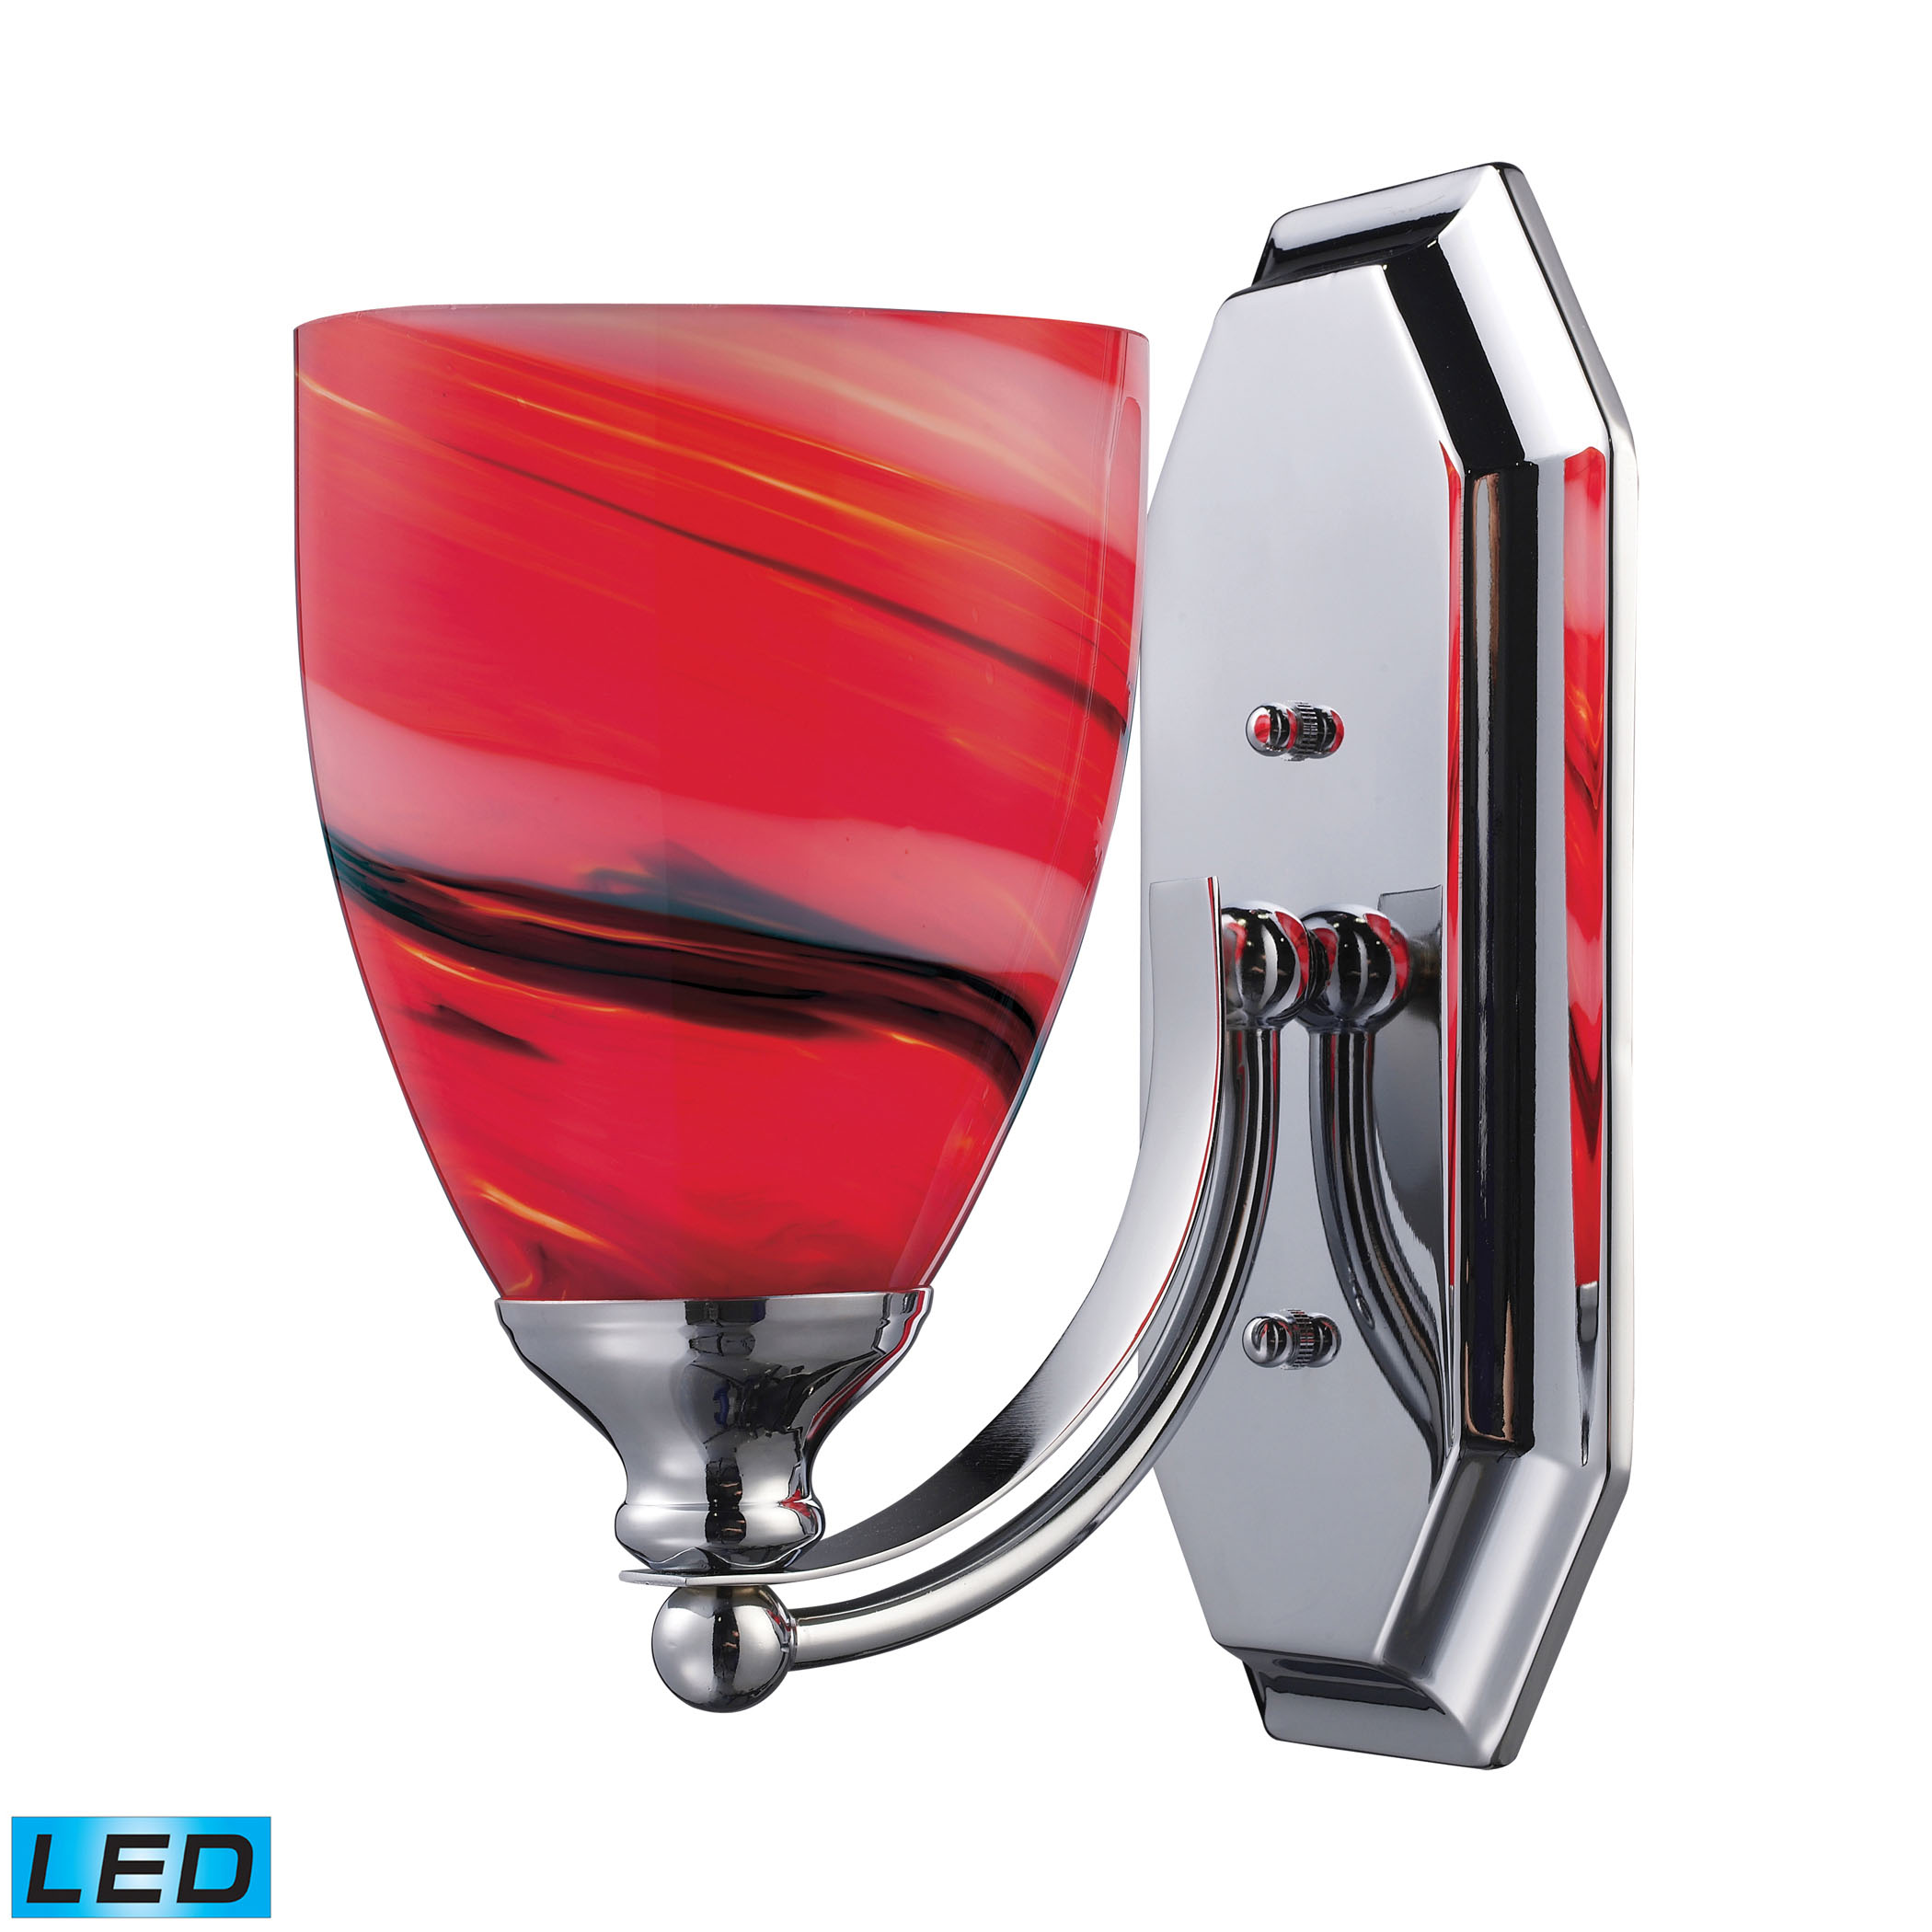 1 Light Vanity in Polished Chrome and Candy Glass - LED Offering Up To 800 Lumens (60 Watt Equivalent)